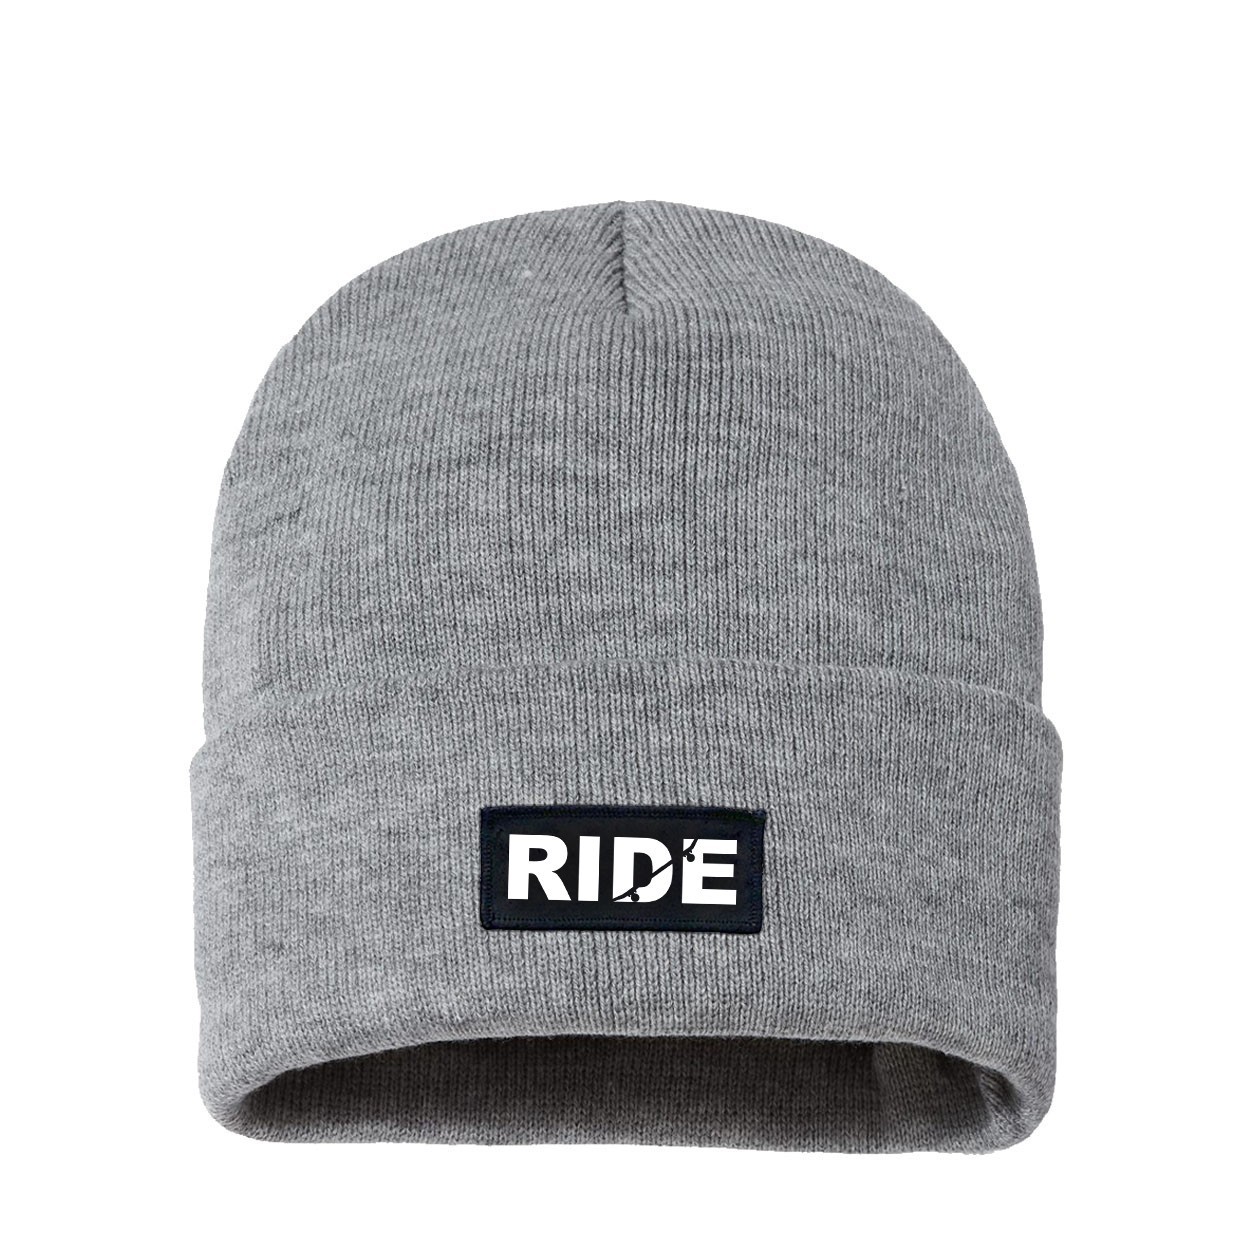 Ride Skateboard Logo Night Out Woven Patch Night Out Sherpa Lined Cuffed Beanie Heather Gray (White Logo)